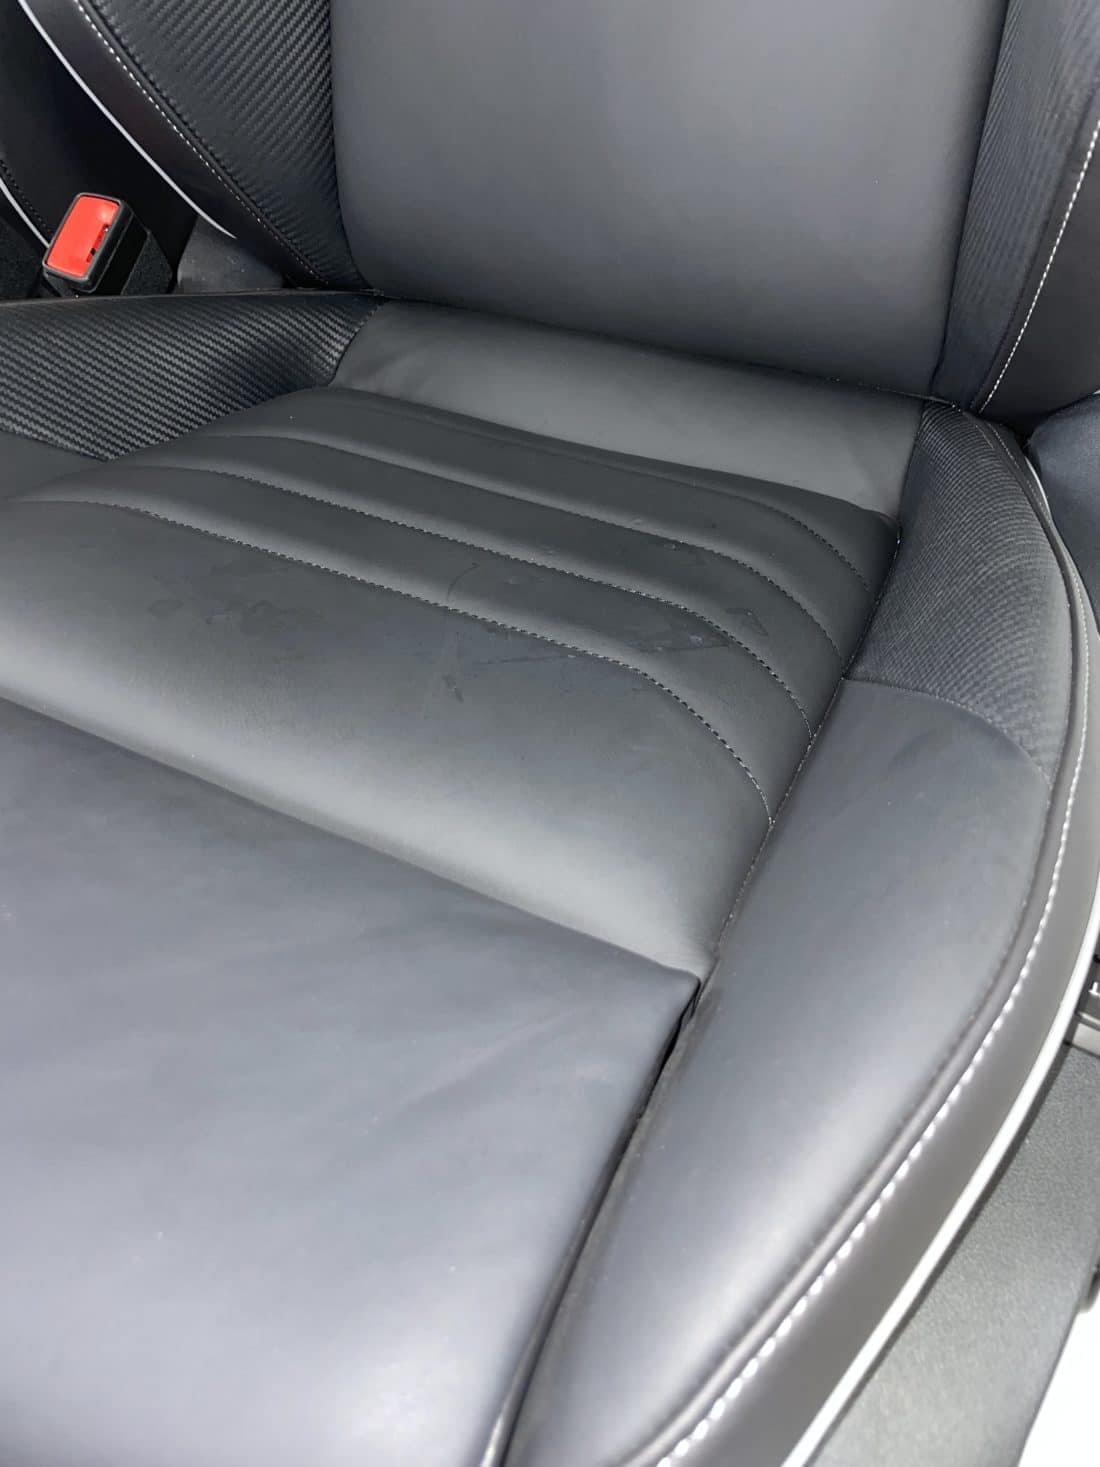 Trp Post Container Data Trp Post Id 9635 Interior Vw Golf 8 R Leather Black Grey Stitching Trp Post Container